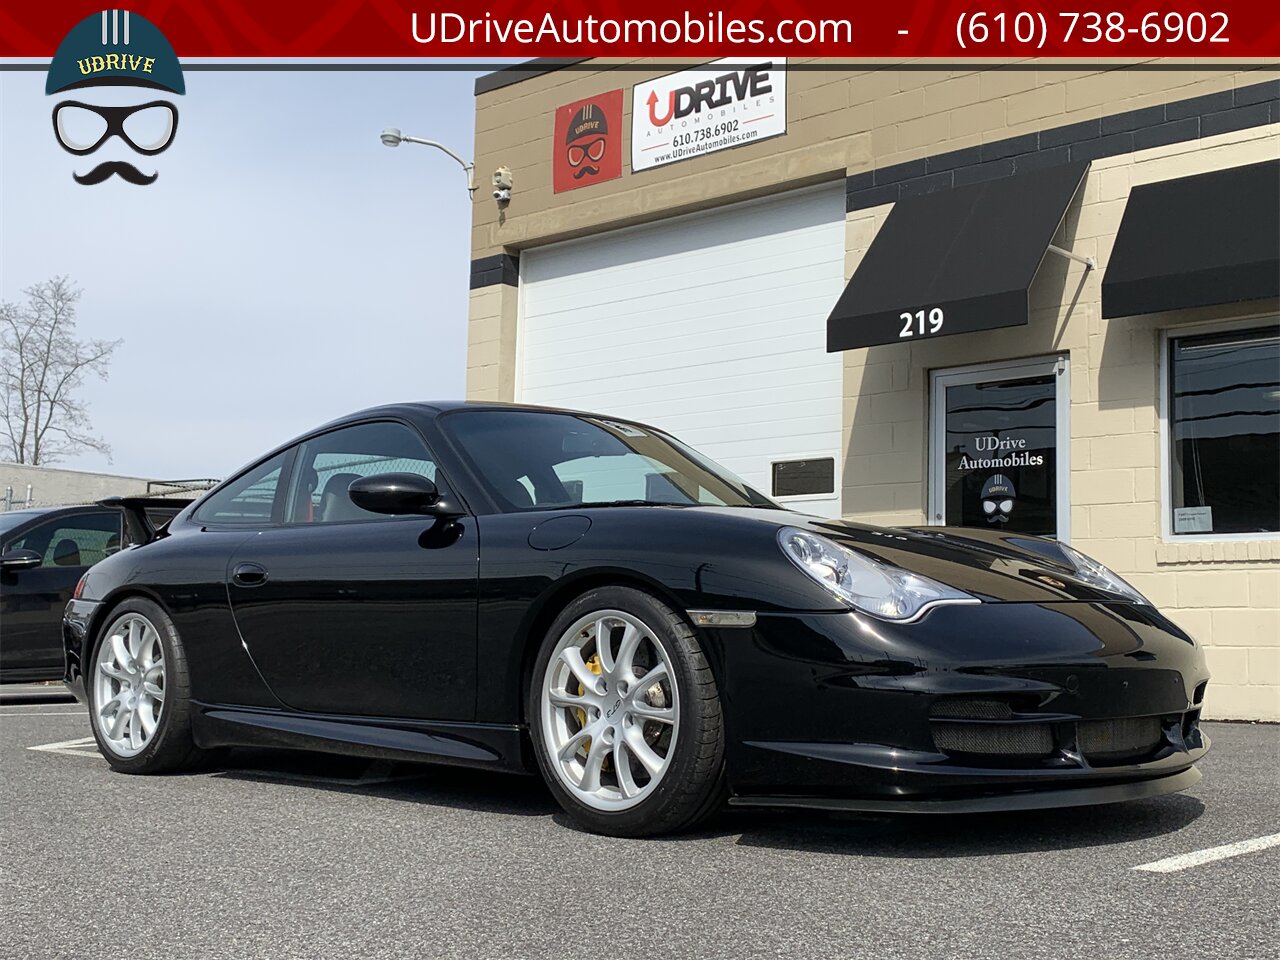 2004 Porsche 911 GT3 996 PCCB Sport Seats Red Stitching $118k MSRP   - Photo 4 - West Chester, PA 19382